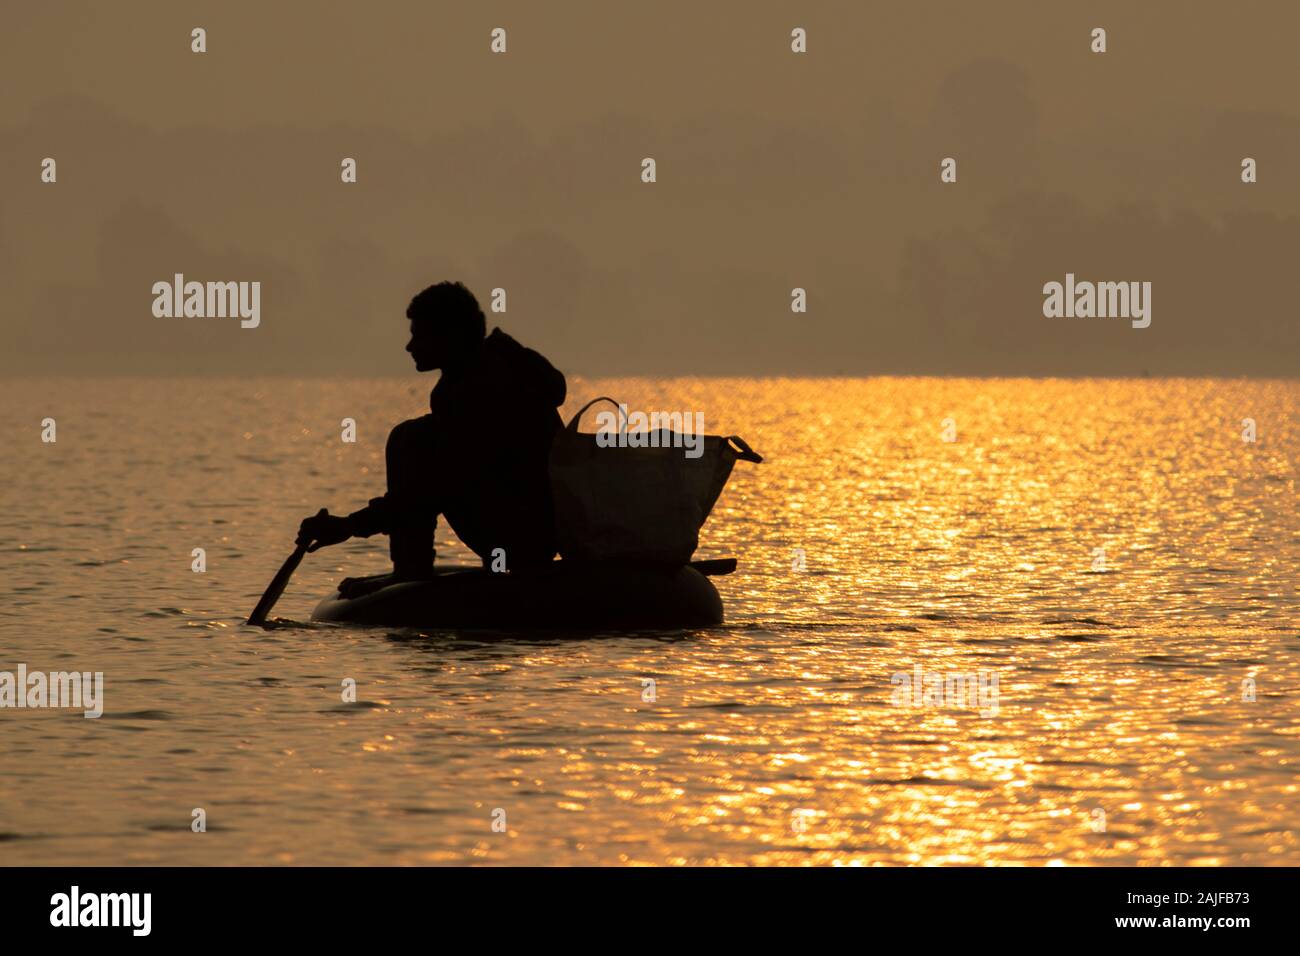 Bichhiya / India / November 29, 2019 - Silhouette photo Indian fisherman is fishing in the pond by sitting in a tube. Stock Photo